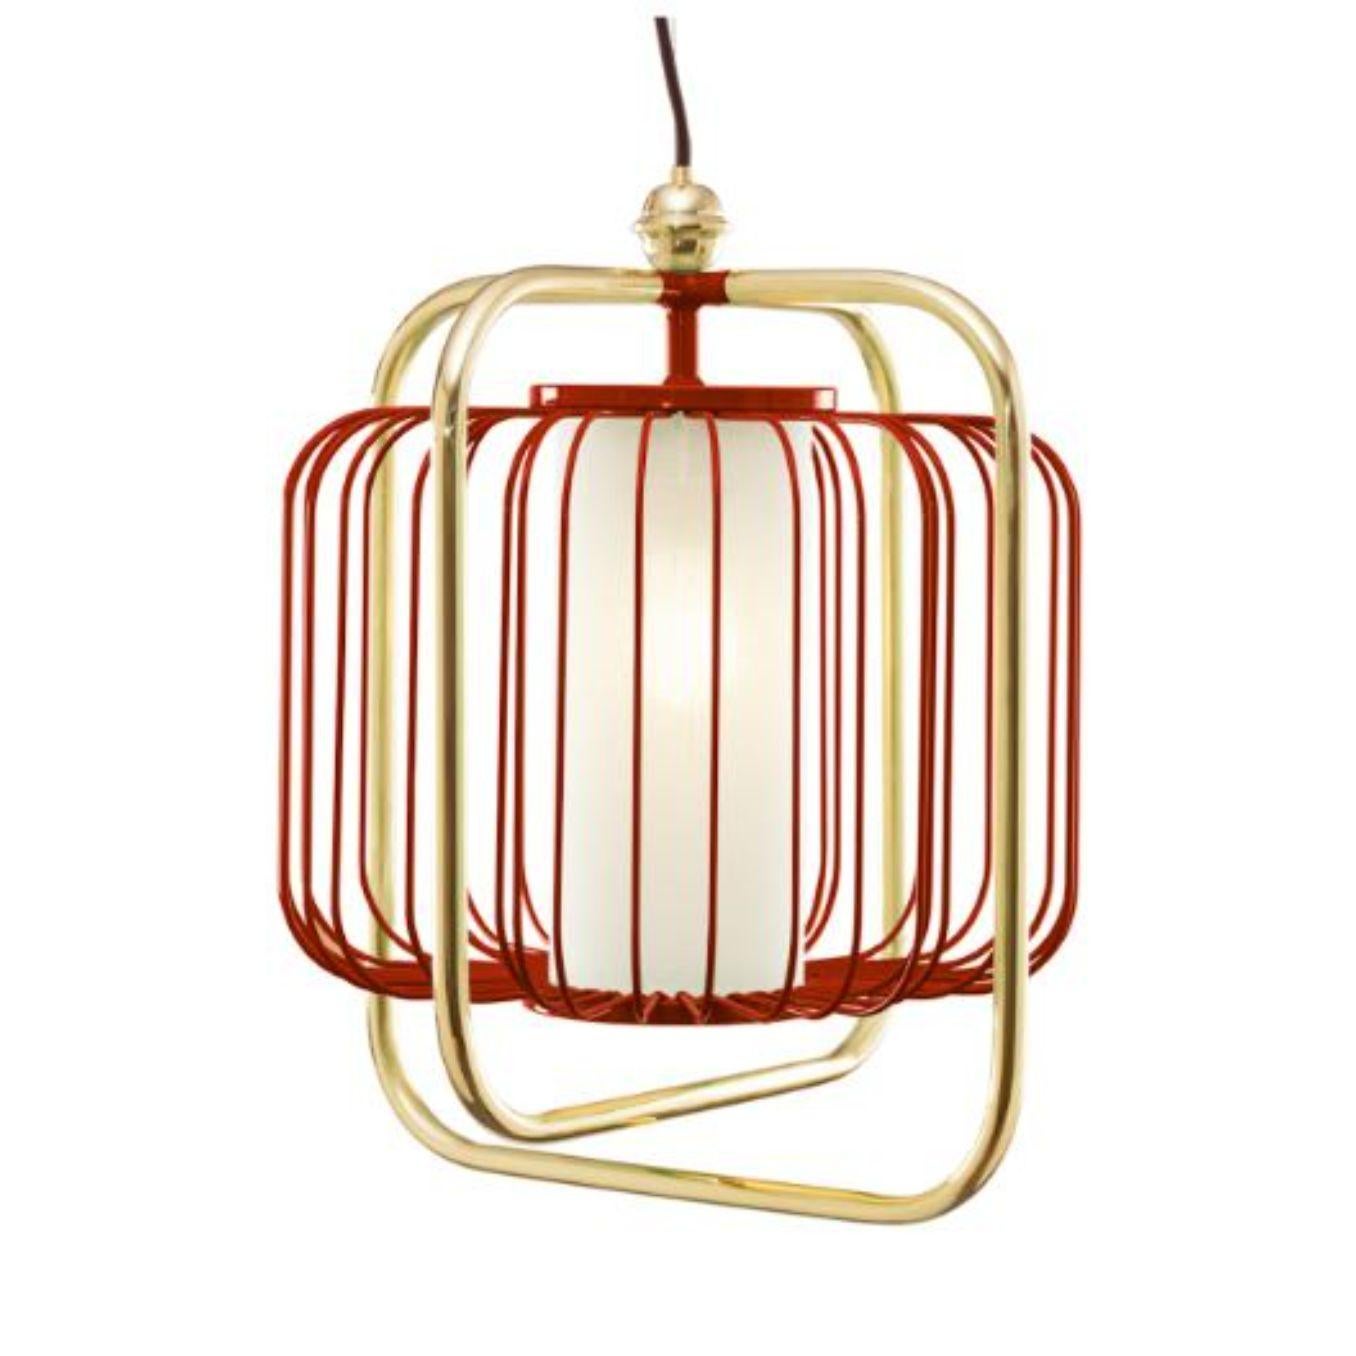 Brass and Salmon Jules III suspension lamp by Dooq.
Dimensions: W 38 x D 38 x H 44 cm.
Materials: lacquered metal, polished or brushed metal, brass.
abat-jour: cotton.
Also available in different colours and